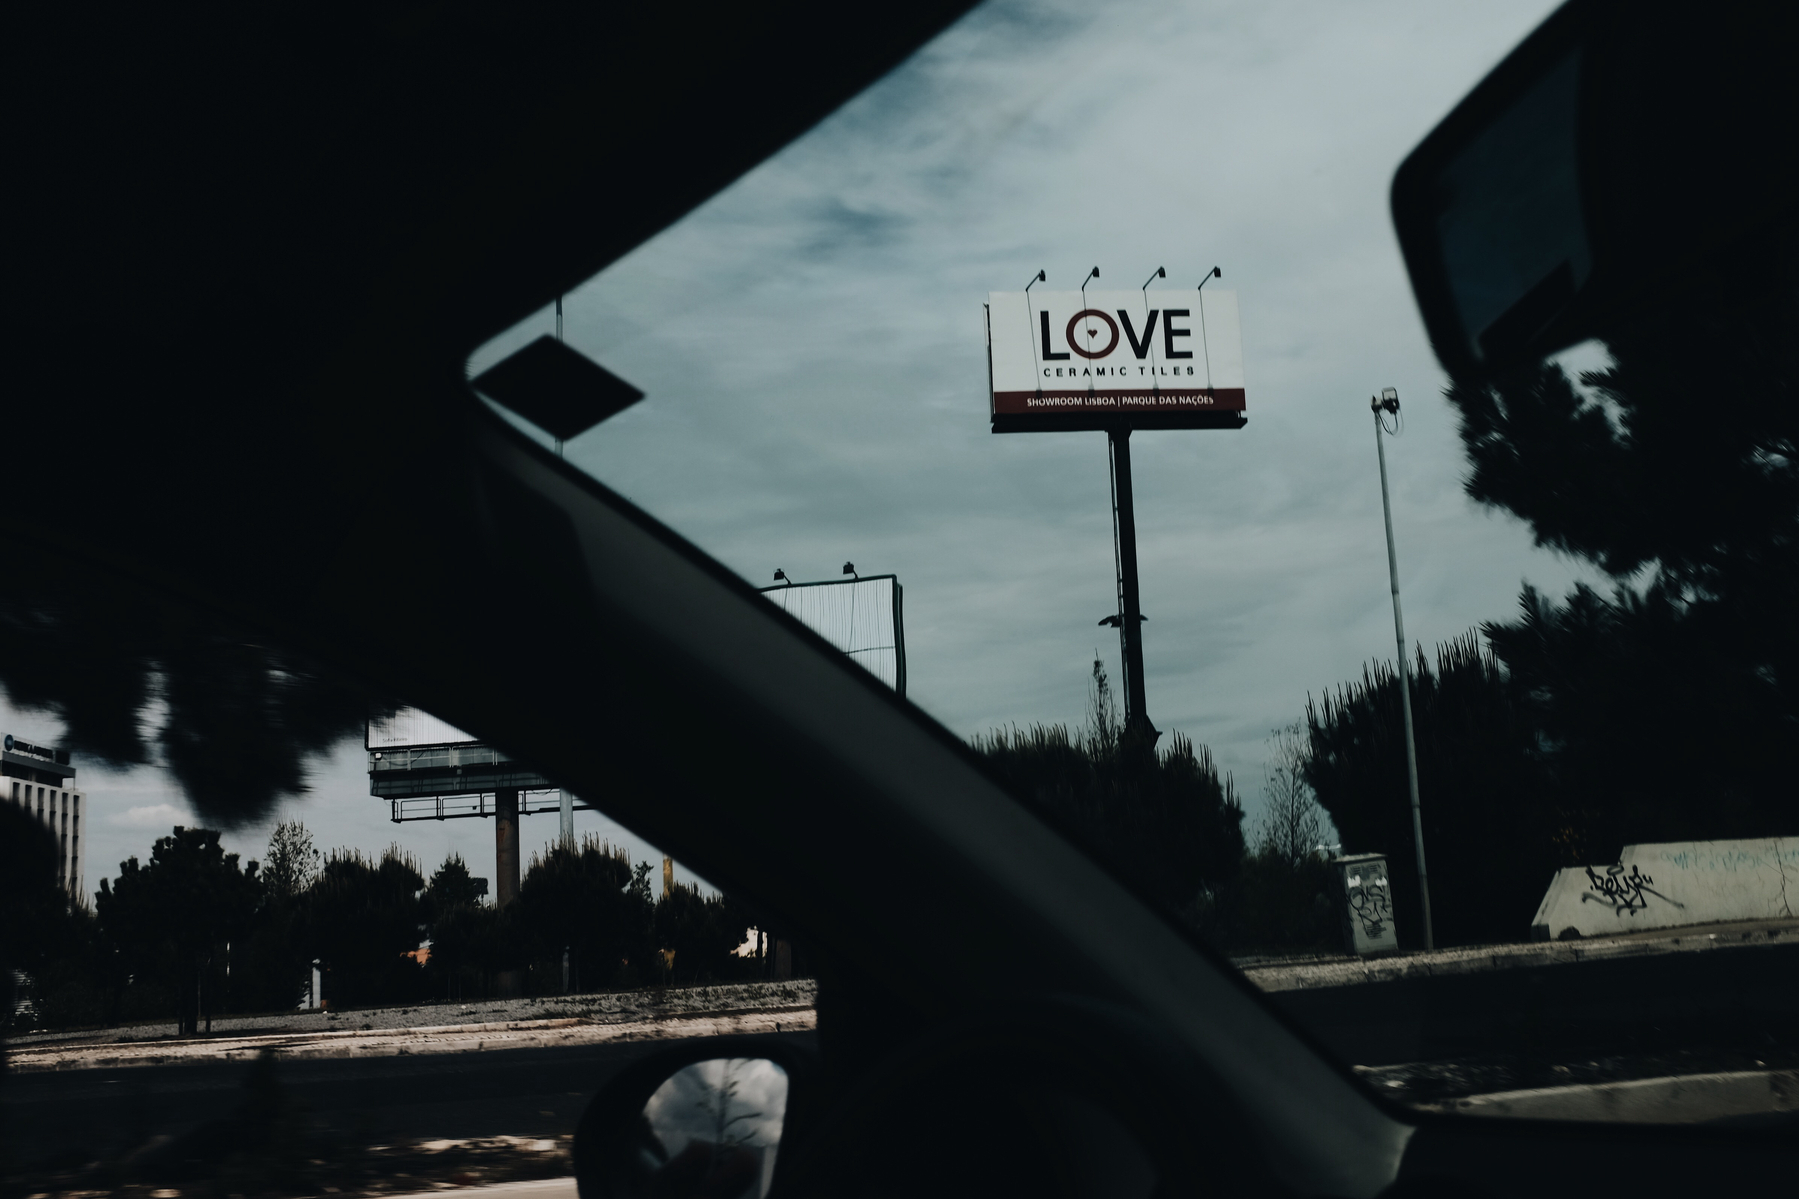 the word “love” is visible from inside a moving car.